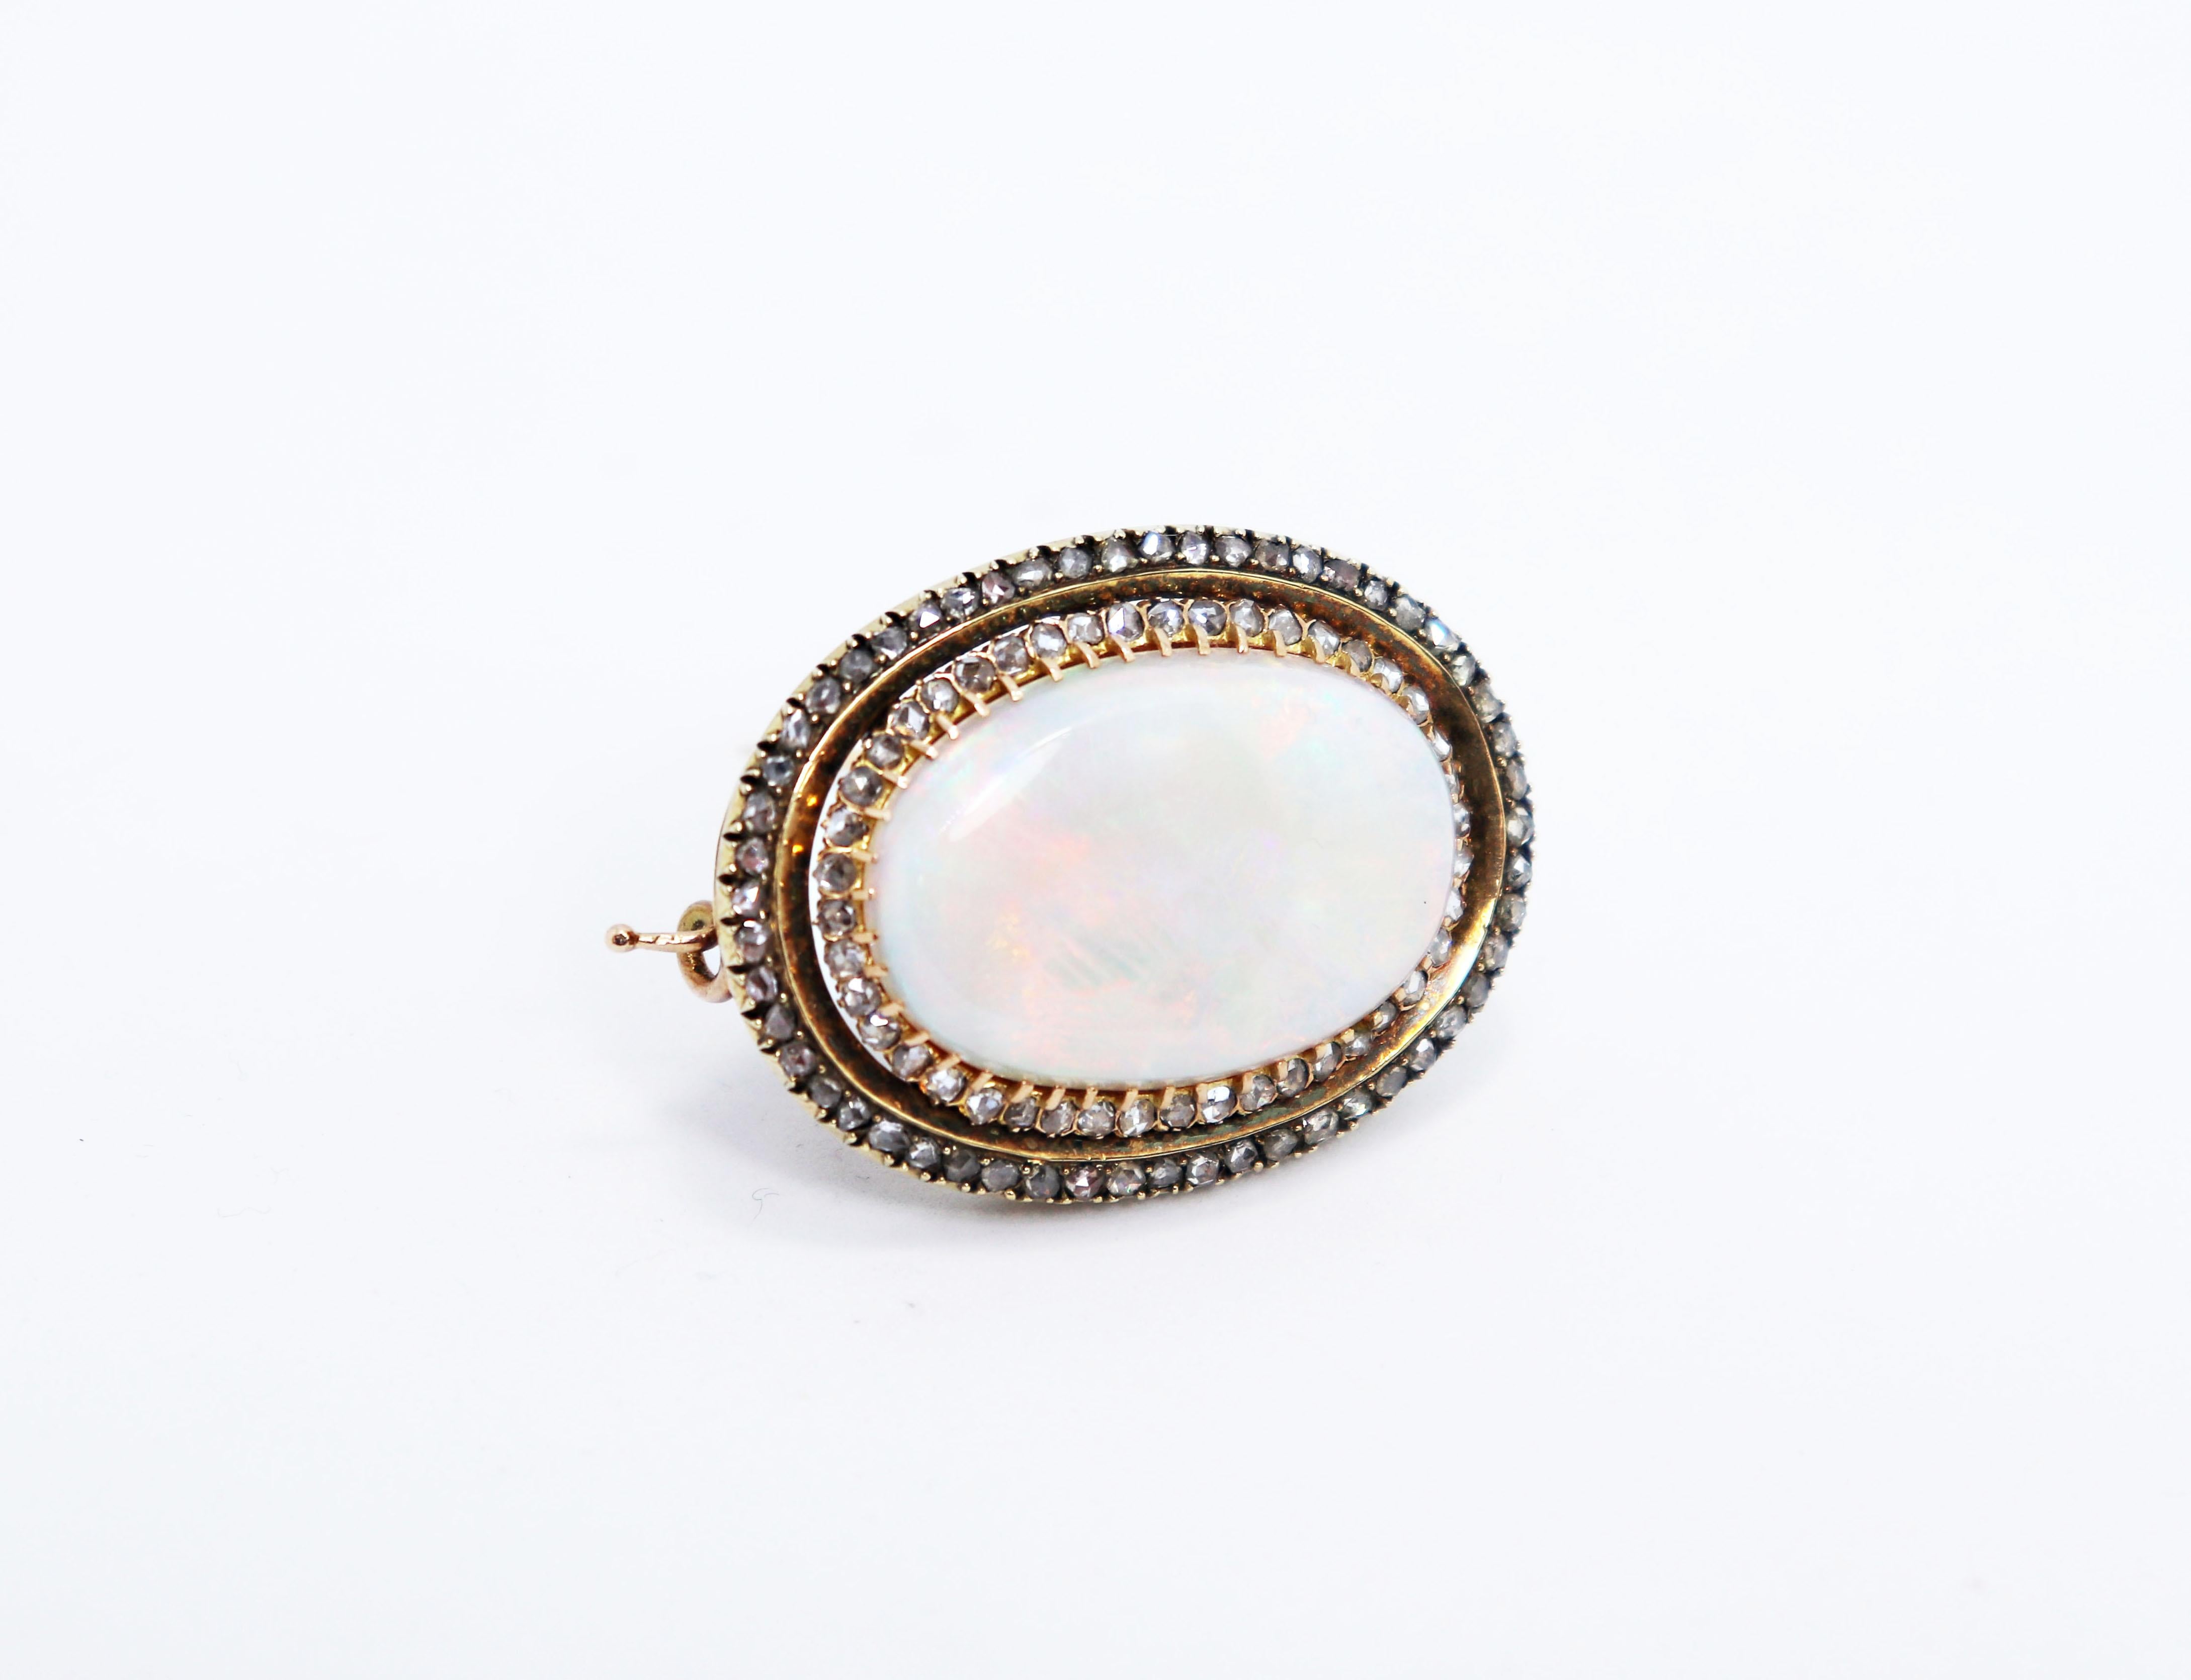 Beautiful handmade antique brooch set with an impressive Australian opal with an approximate weight of 35.00 carats measuring 20x30mm in a 43 claw setting. The opal is surrounded by two rows of rose cut diamonds, coronet set,  totalling to